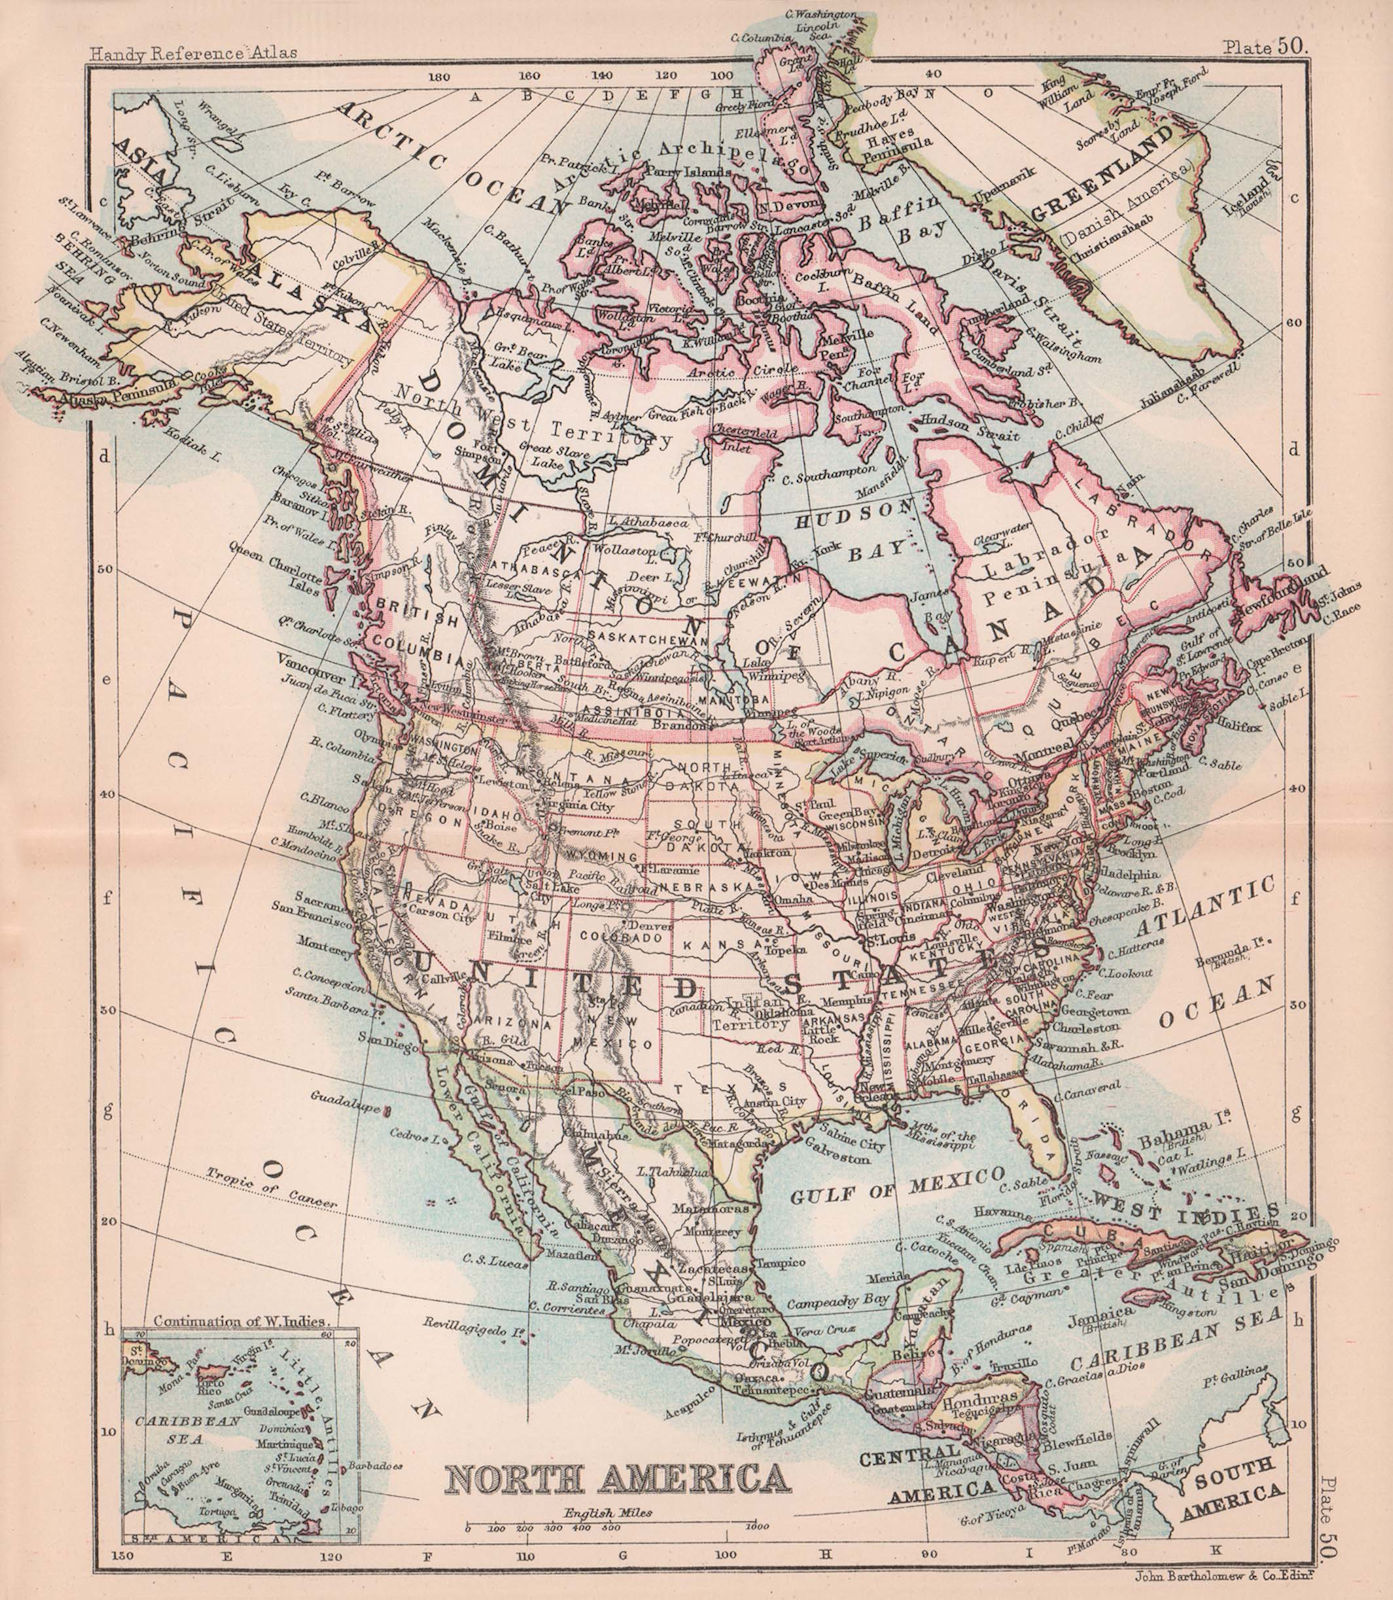 Associate Product North America. United States Canada Mexico. BARTHOLOMEW 1893 old antique map